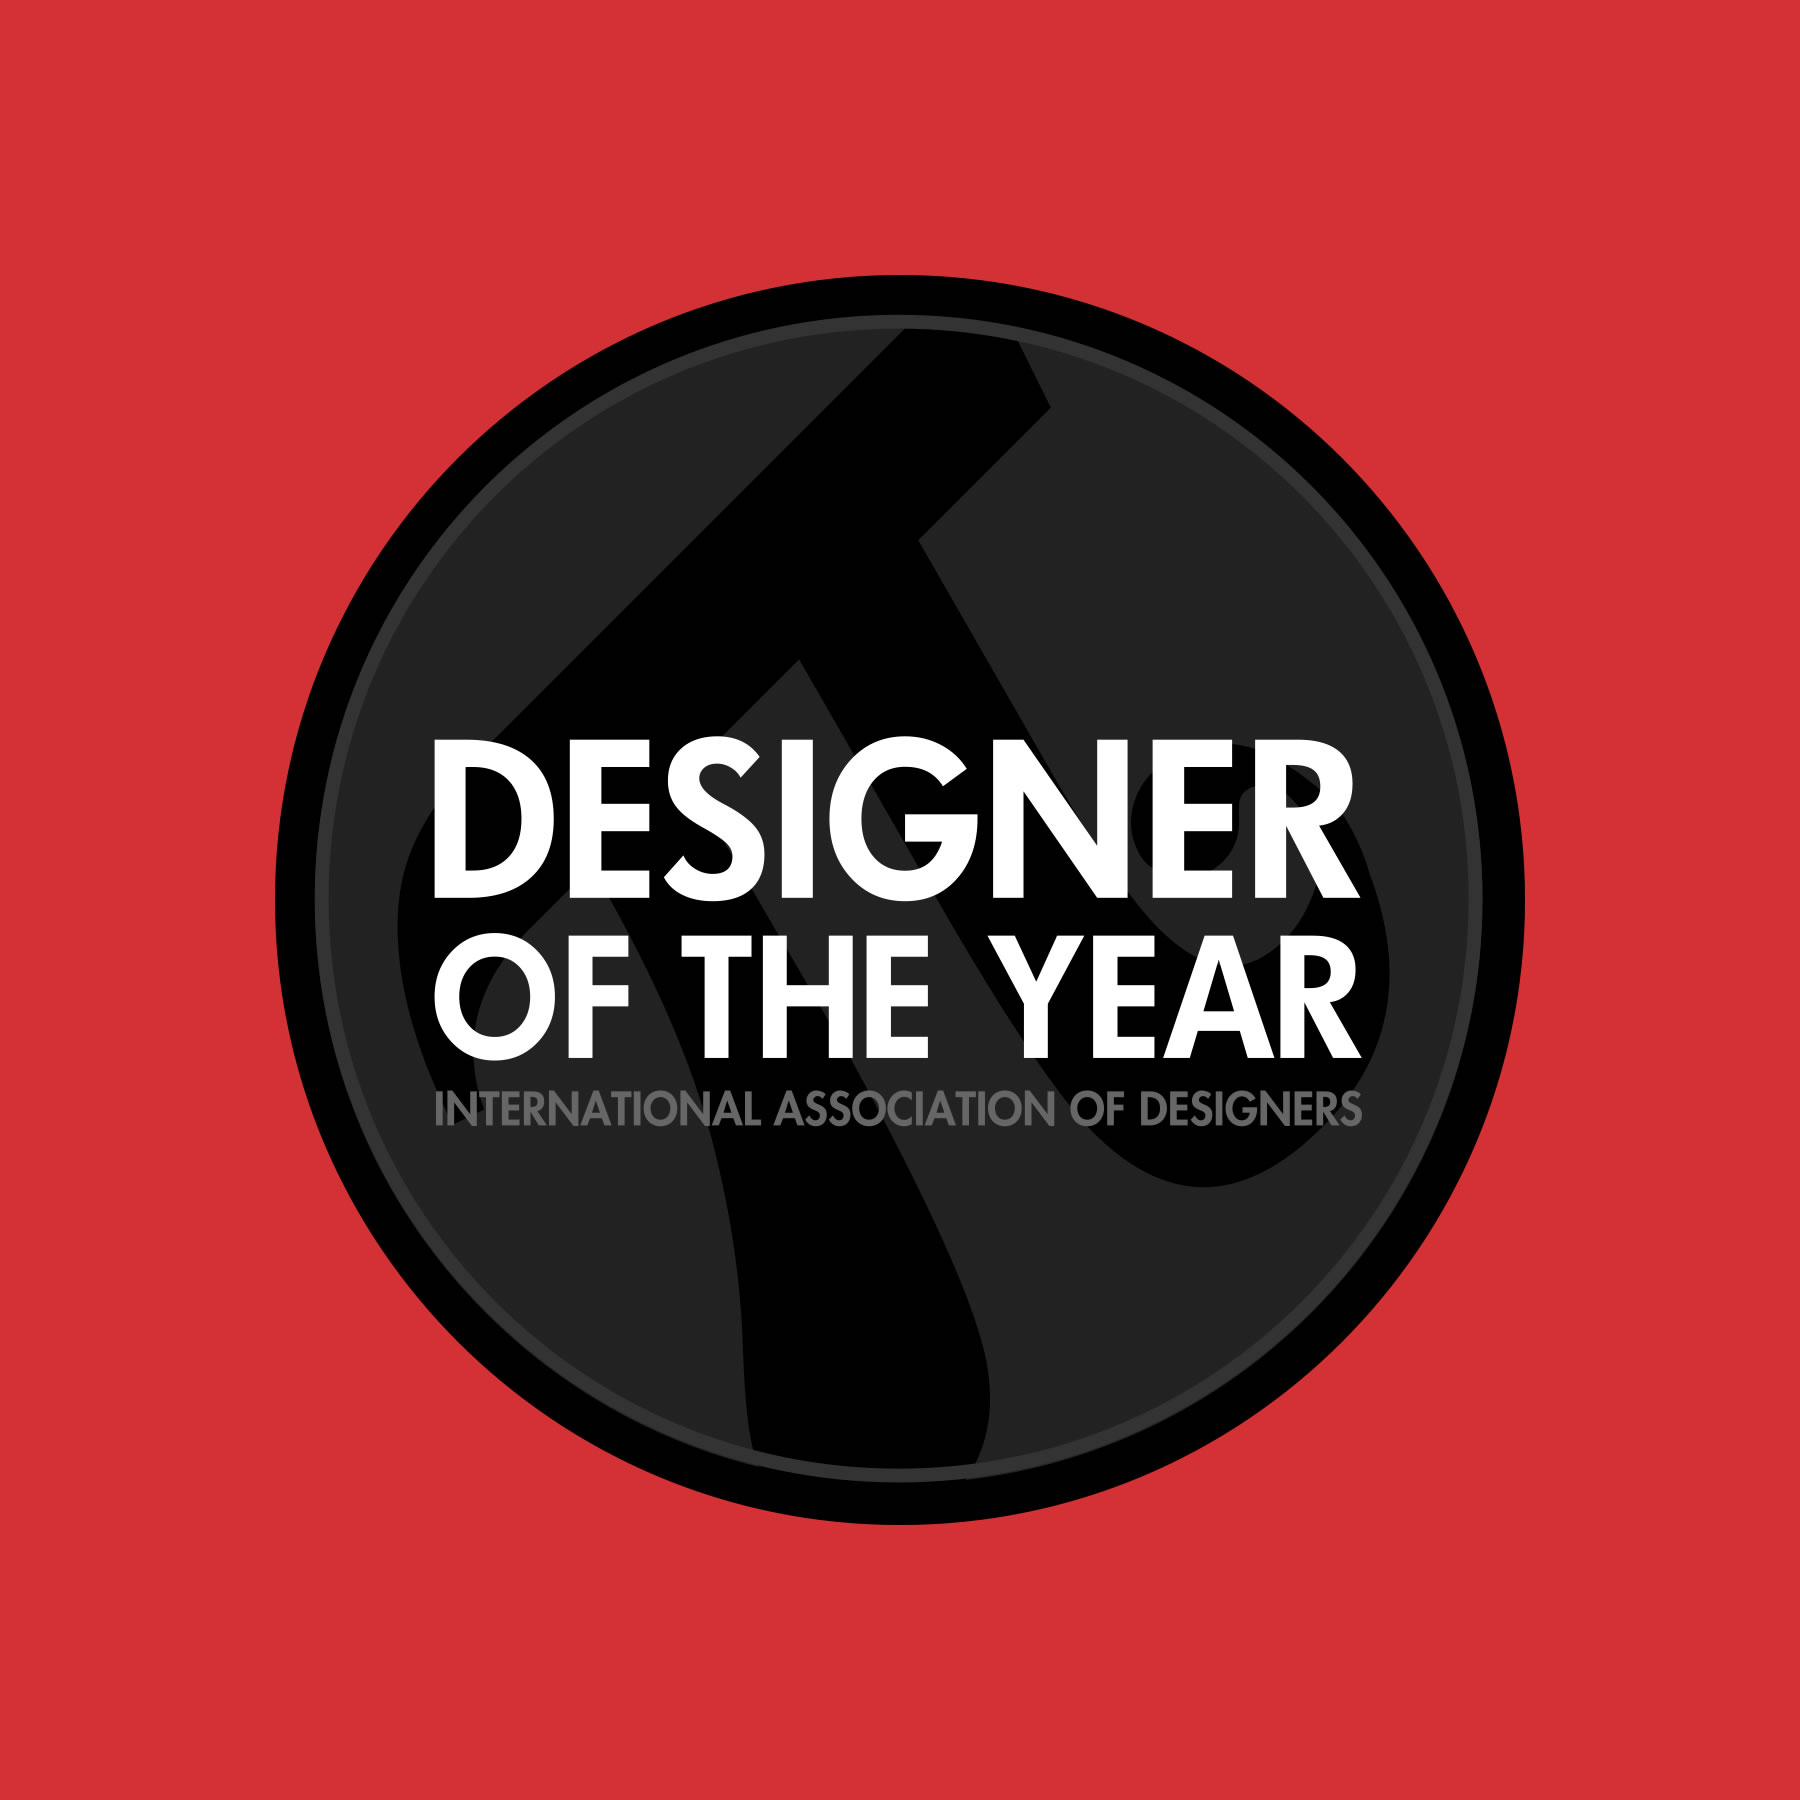 logo of the Designer of the Year award on red background